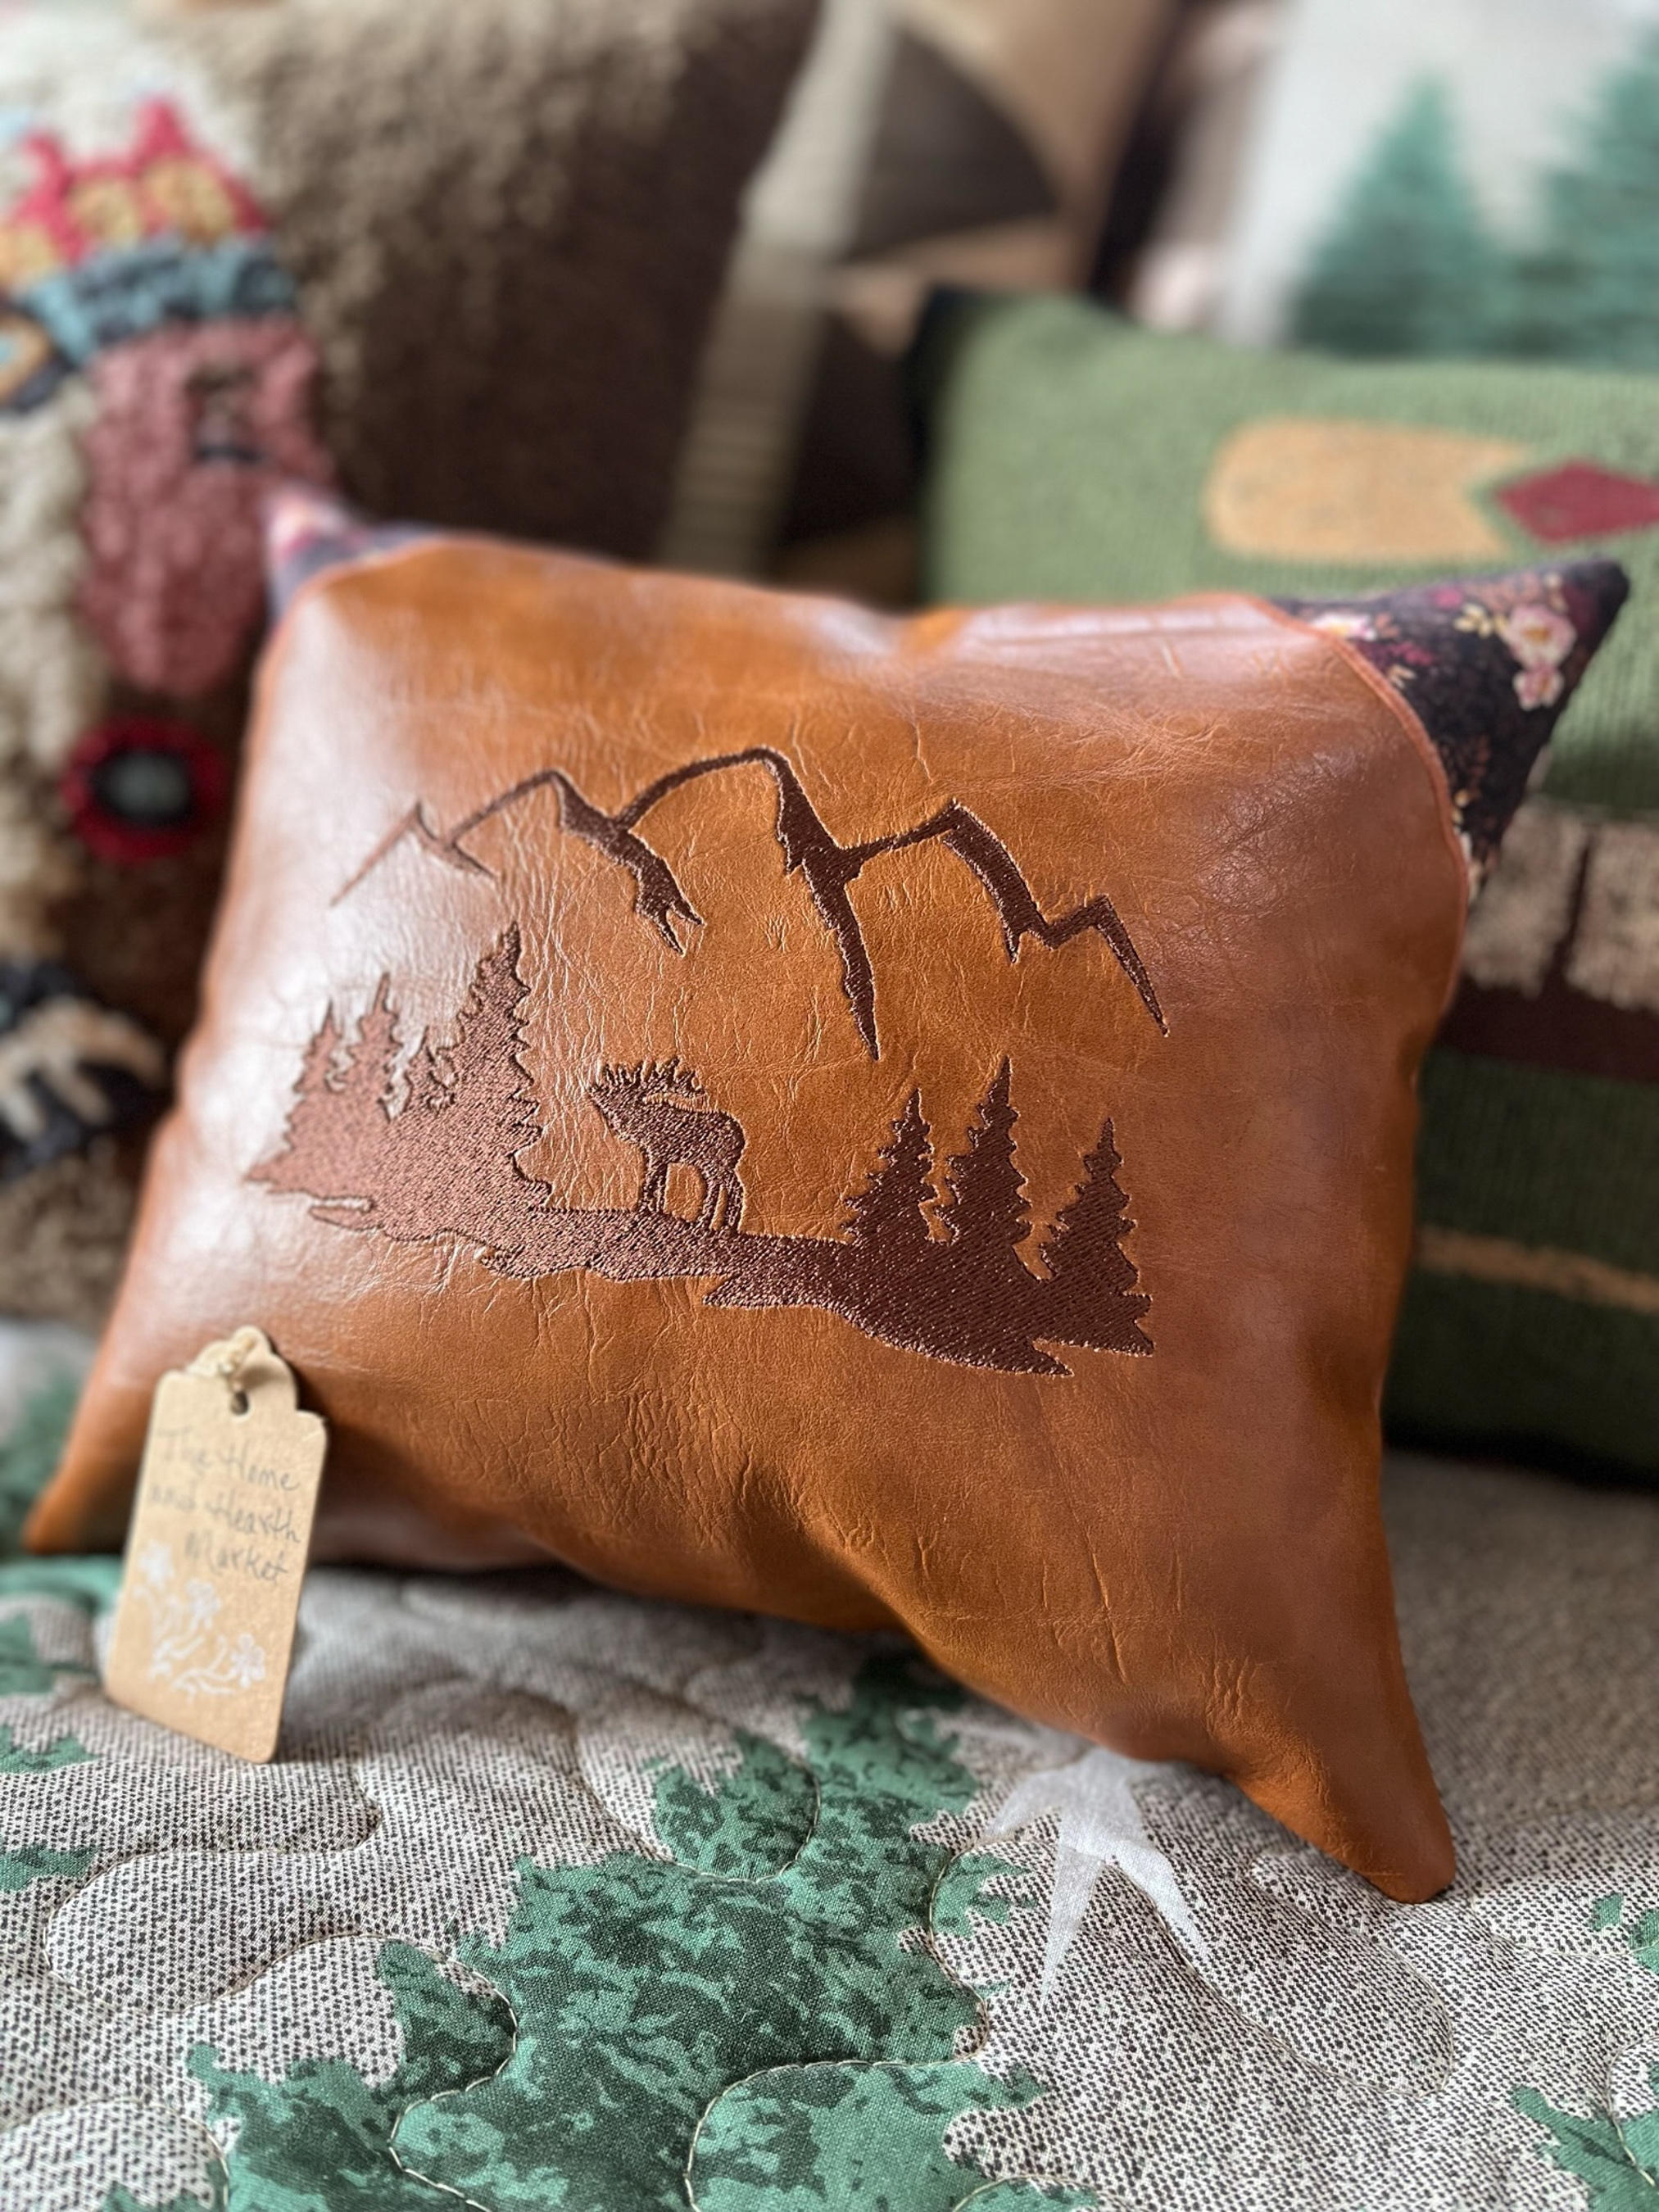 Rustic Lodge Accent Pillow